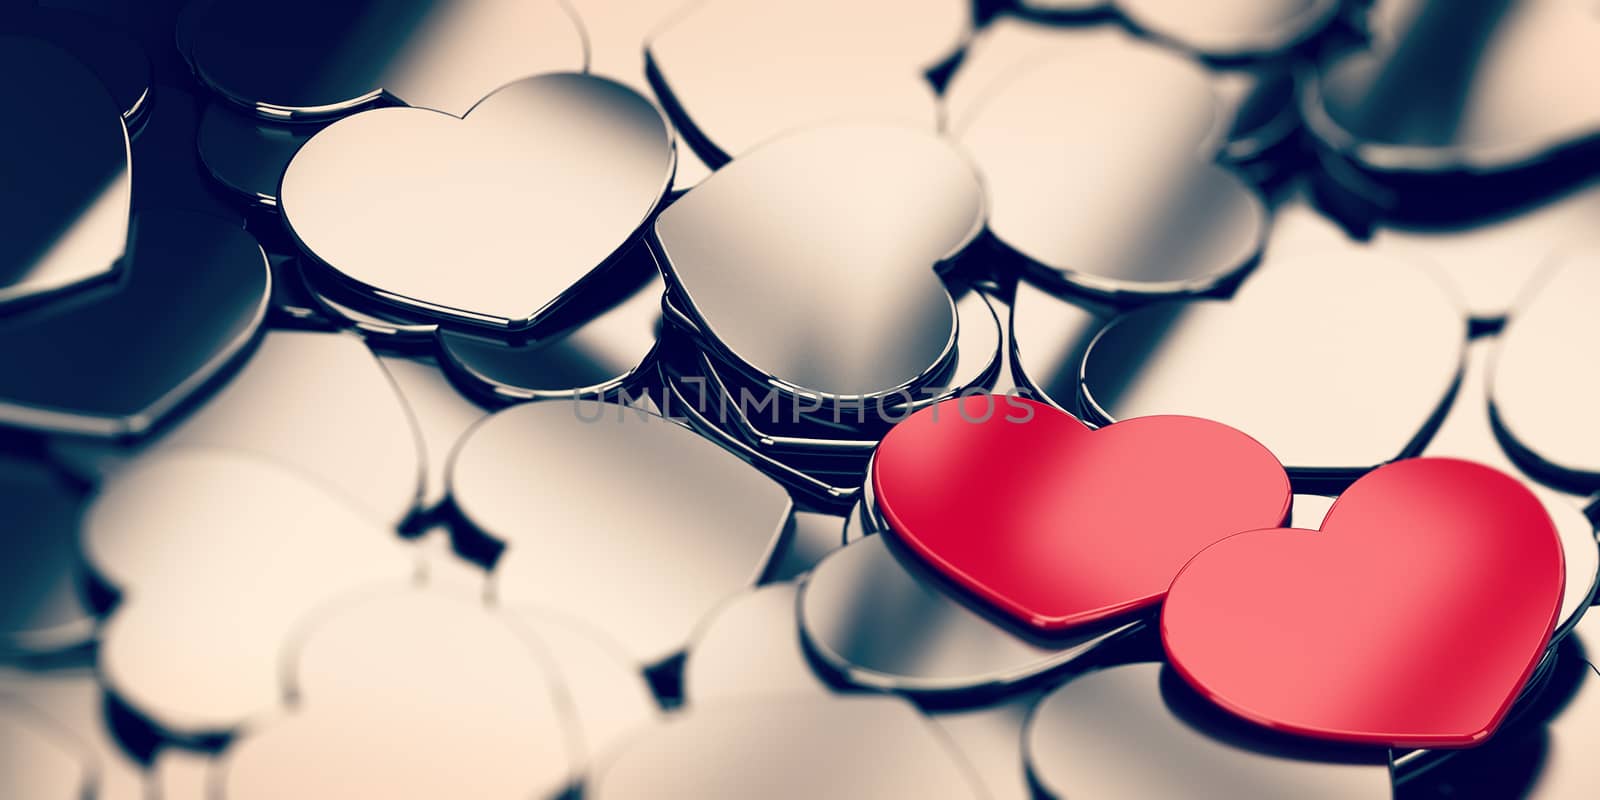 Love background with many metal heart shapes and two red hearts on the right side of the image. 